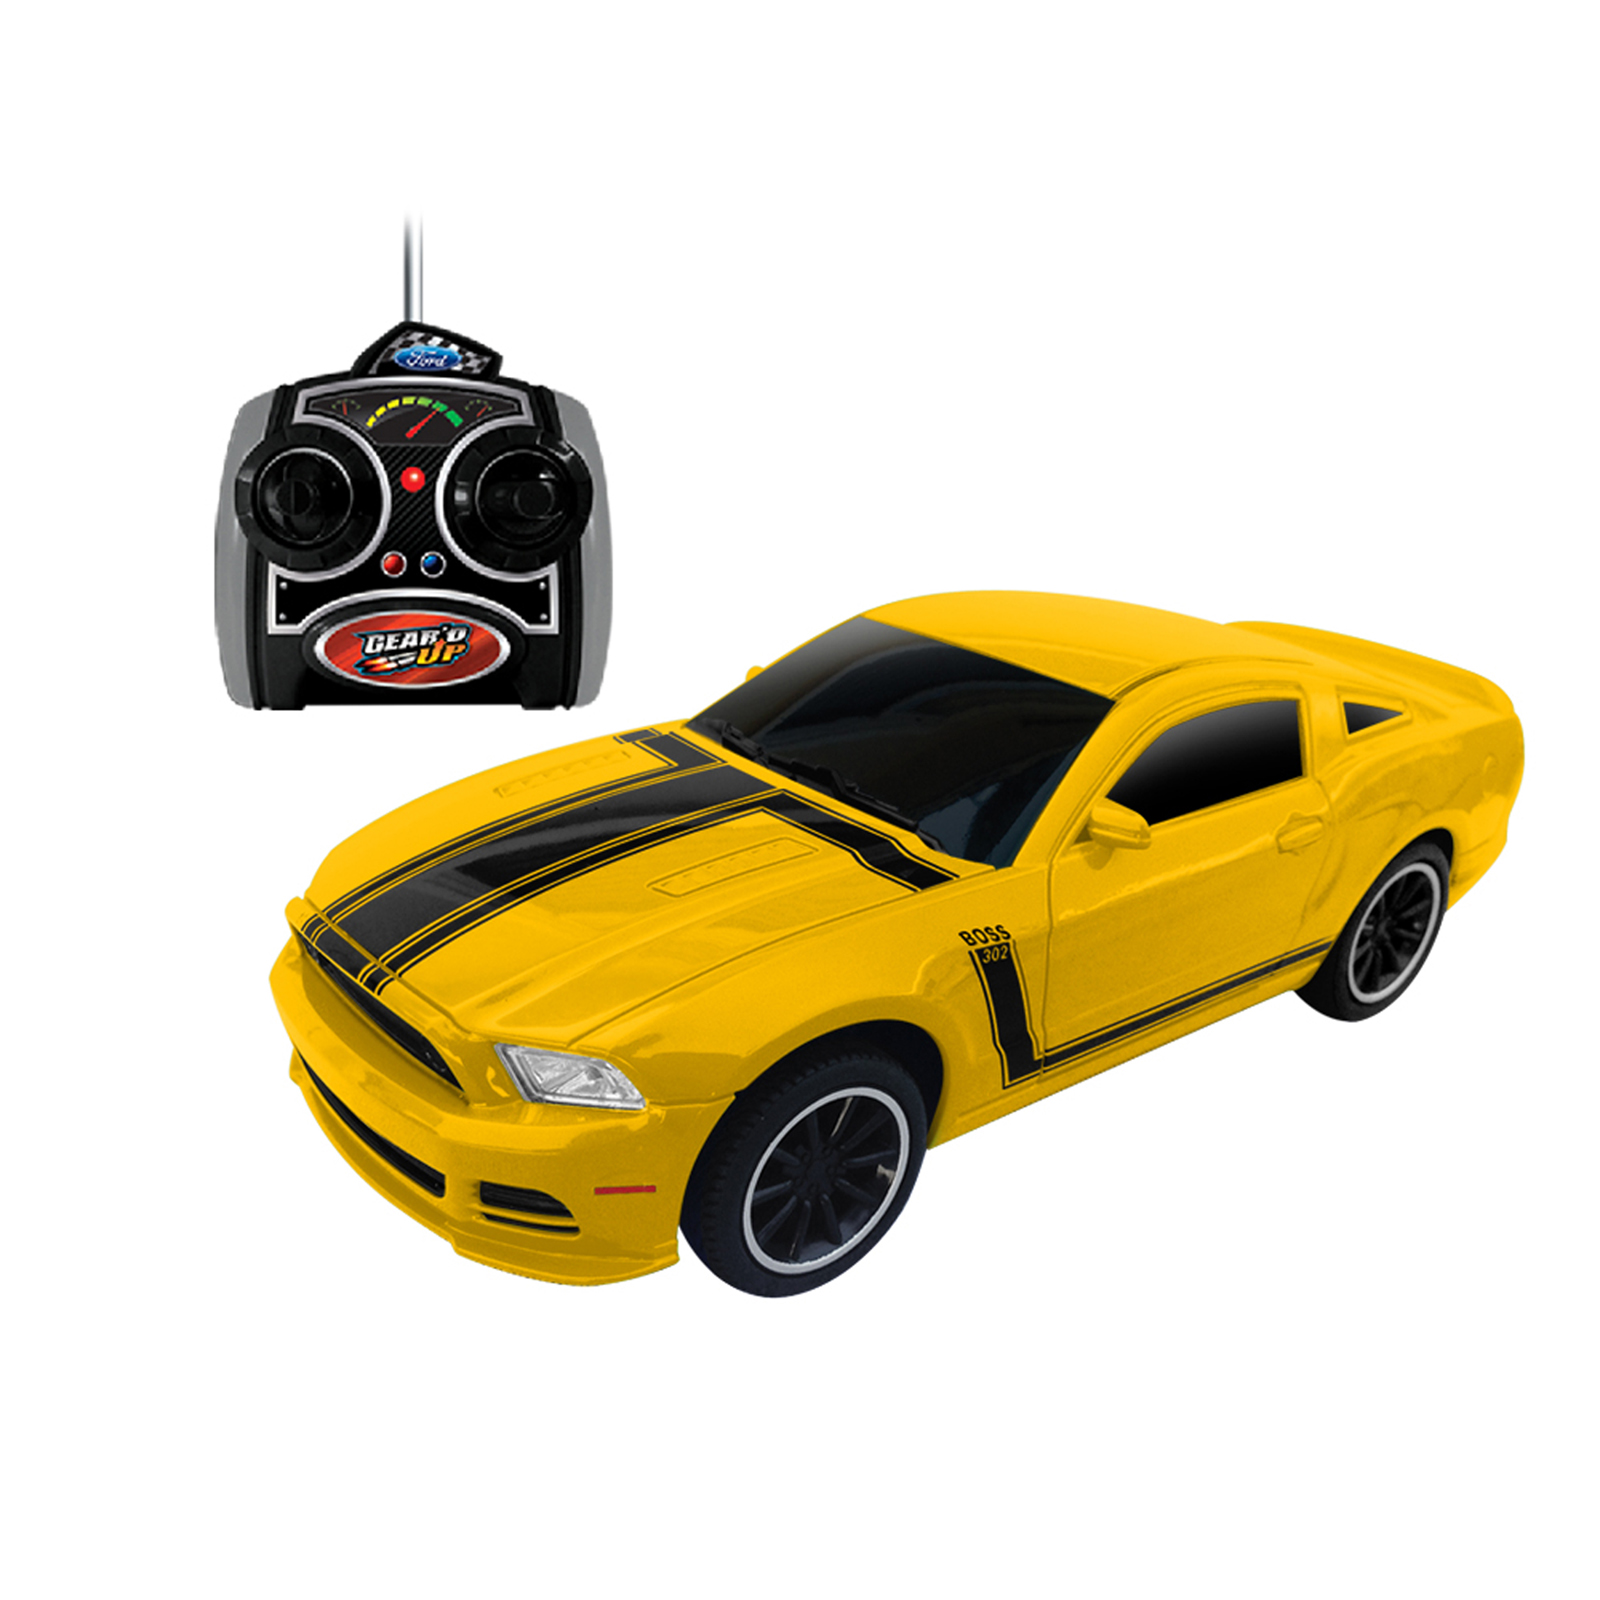 0887030226033 - FORD MUSTANG BOSS 302 YELLOW REMOTE CONTROL VEHICLE